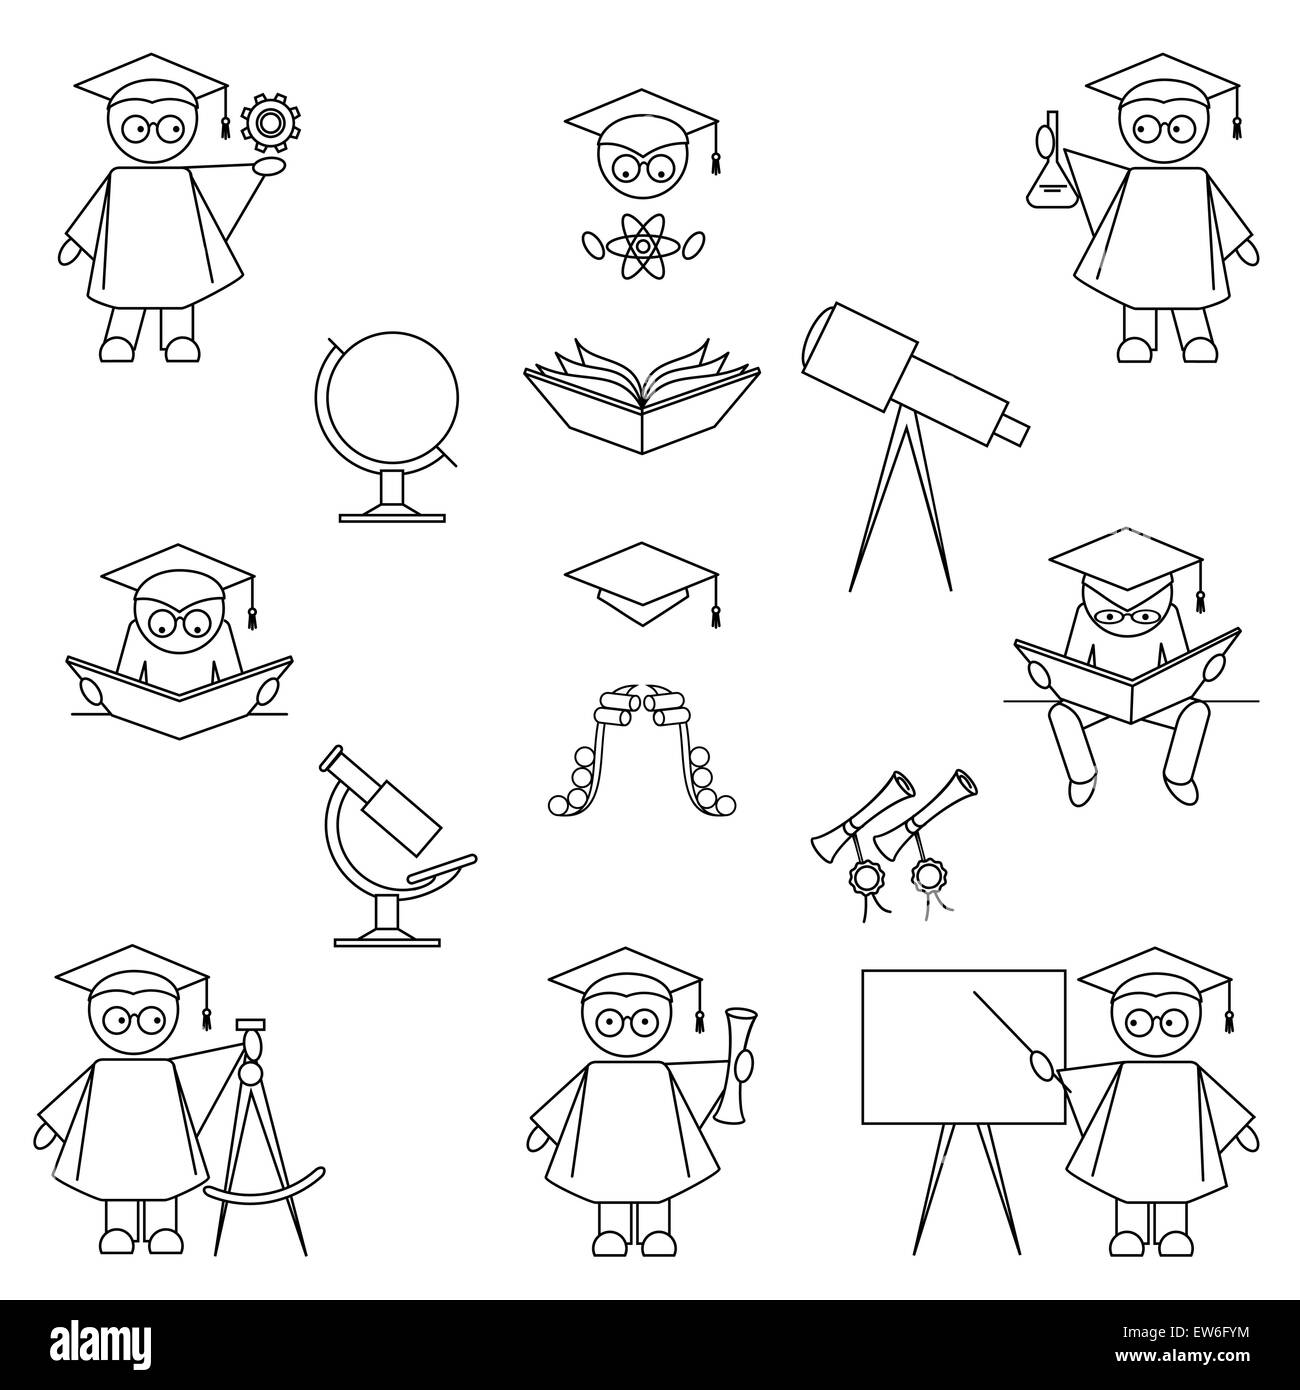 Scientist and education icon set. Thin line art style. Isolated on white background Stock Vector